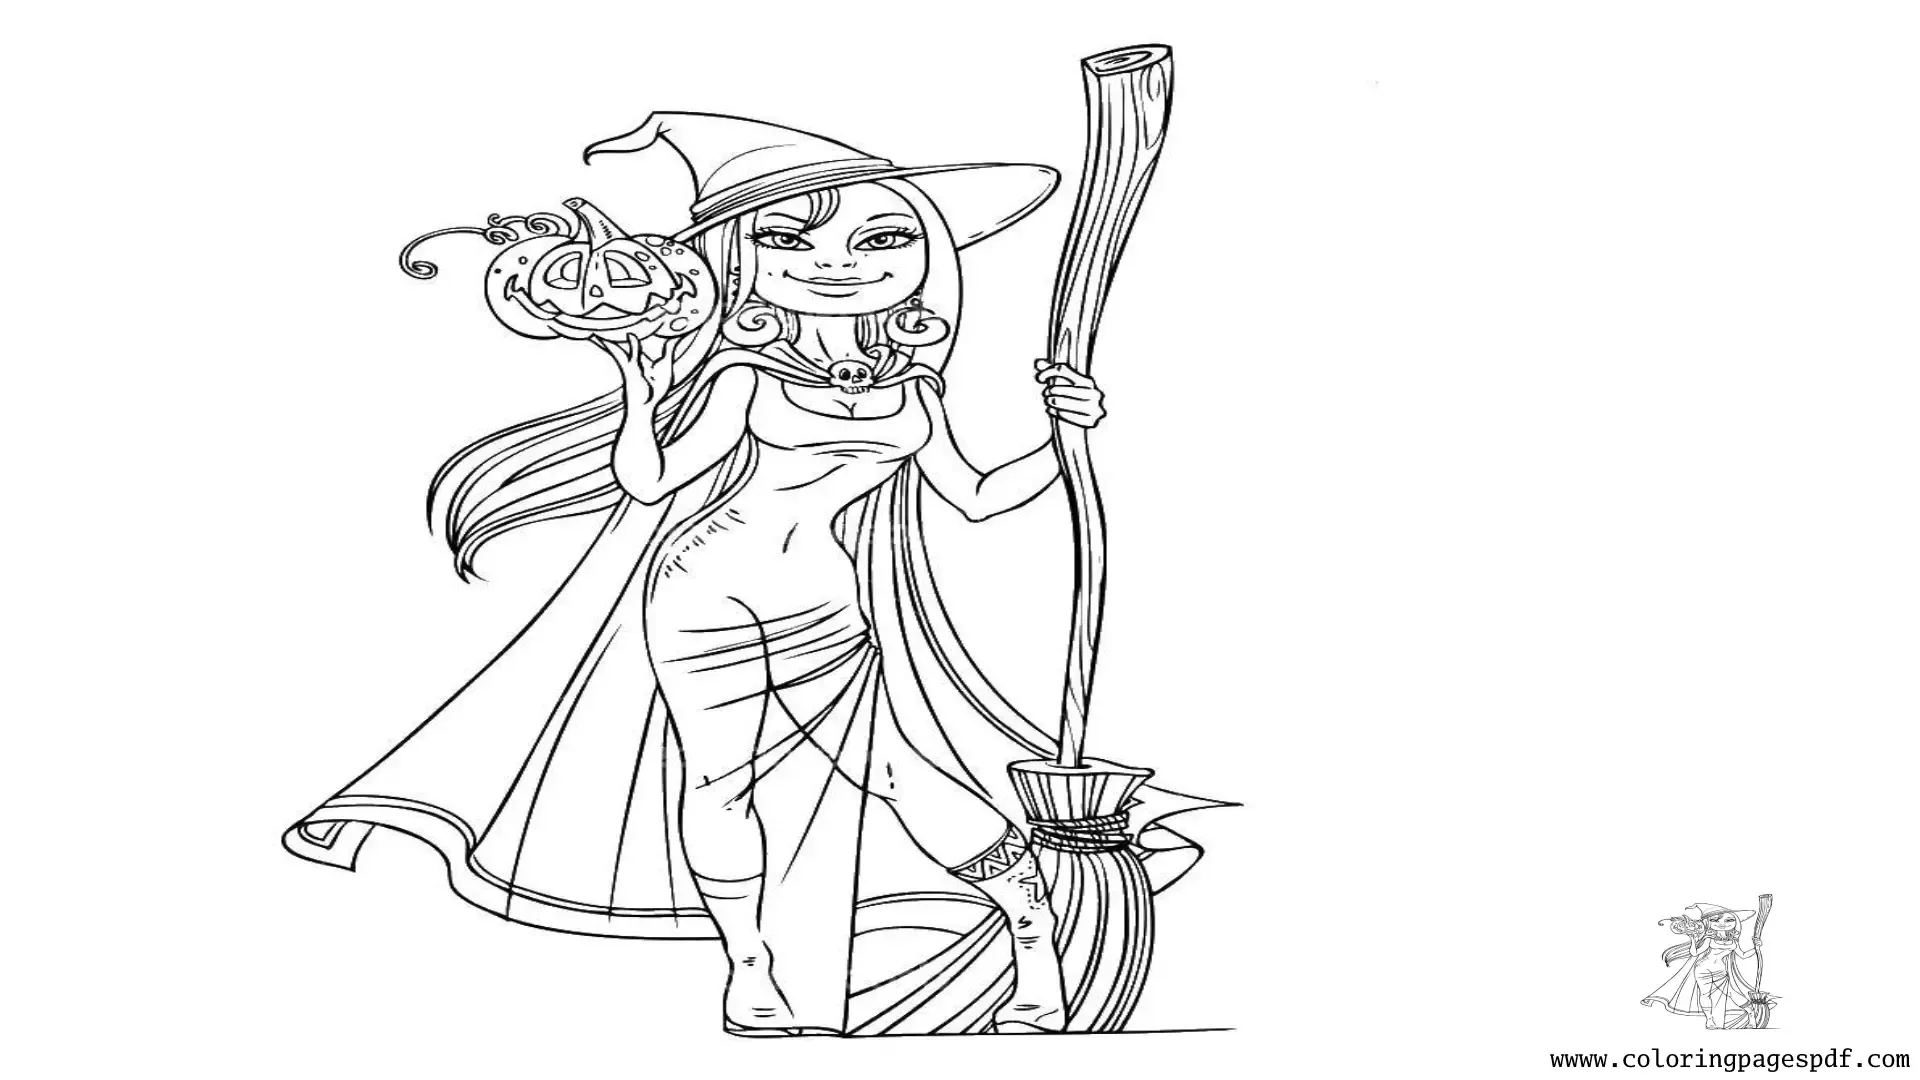 Coloring Page Of A Witch Holding A Broom